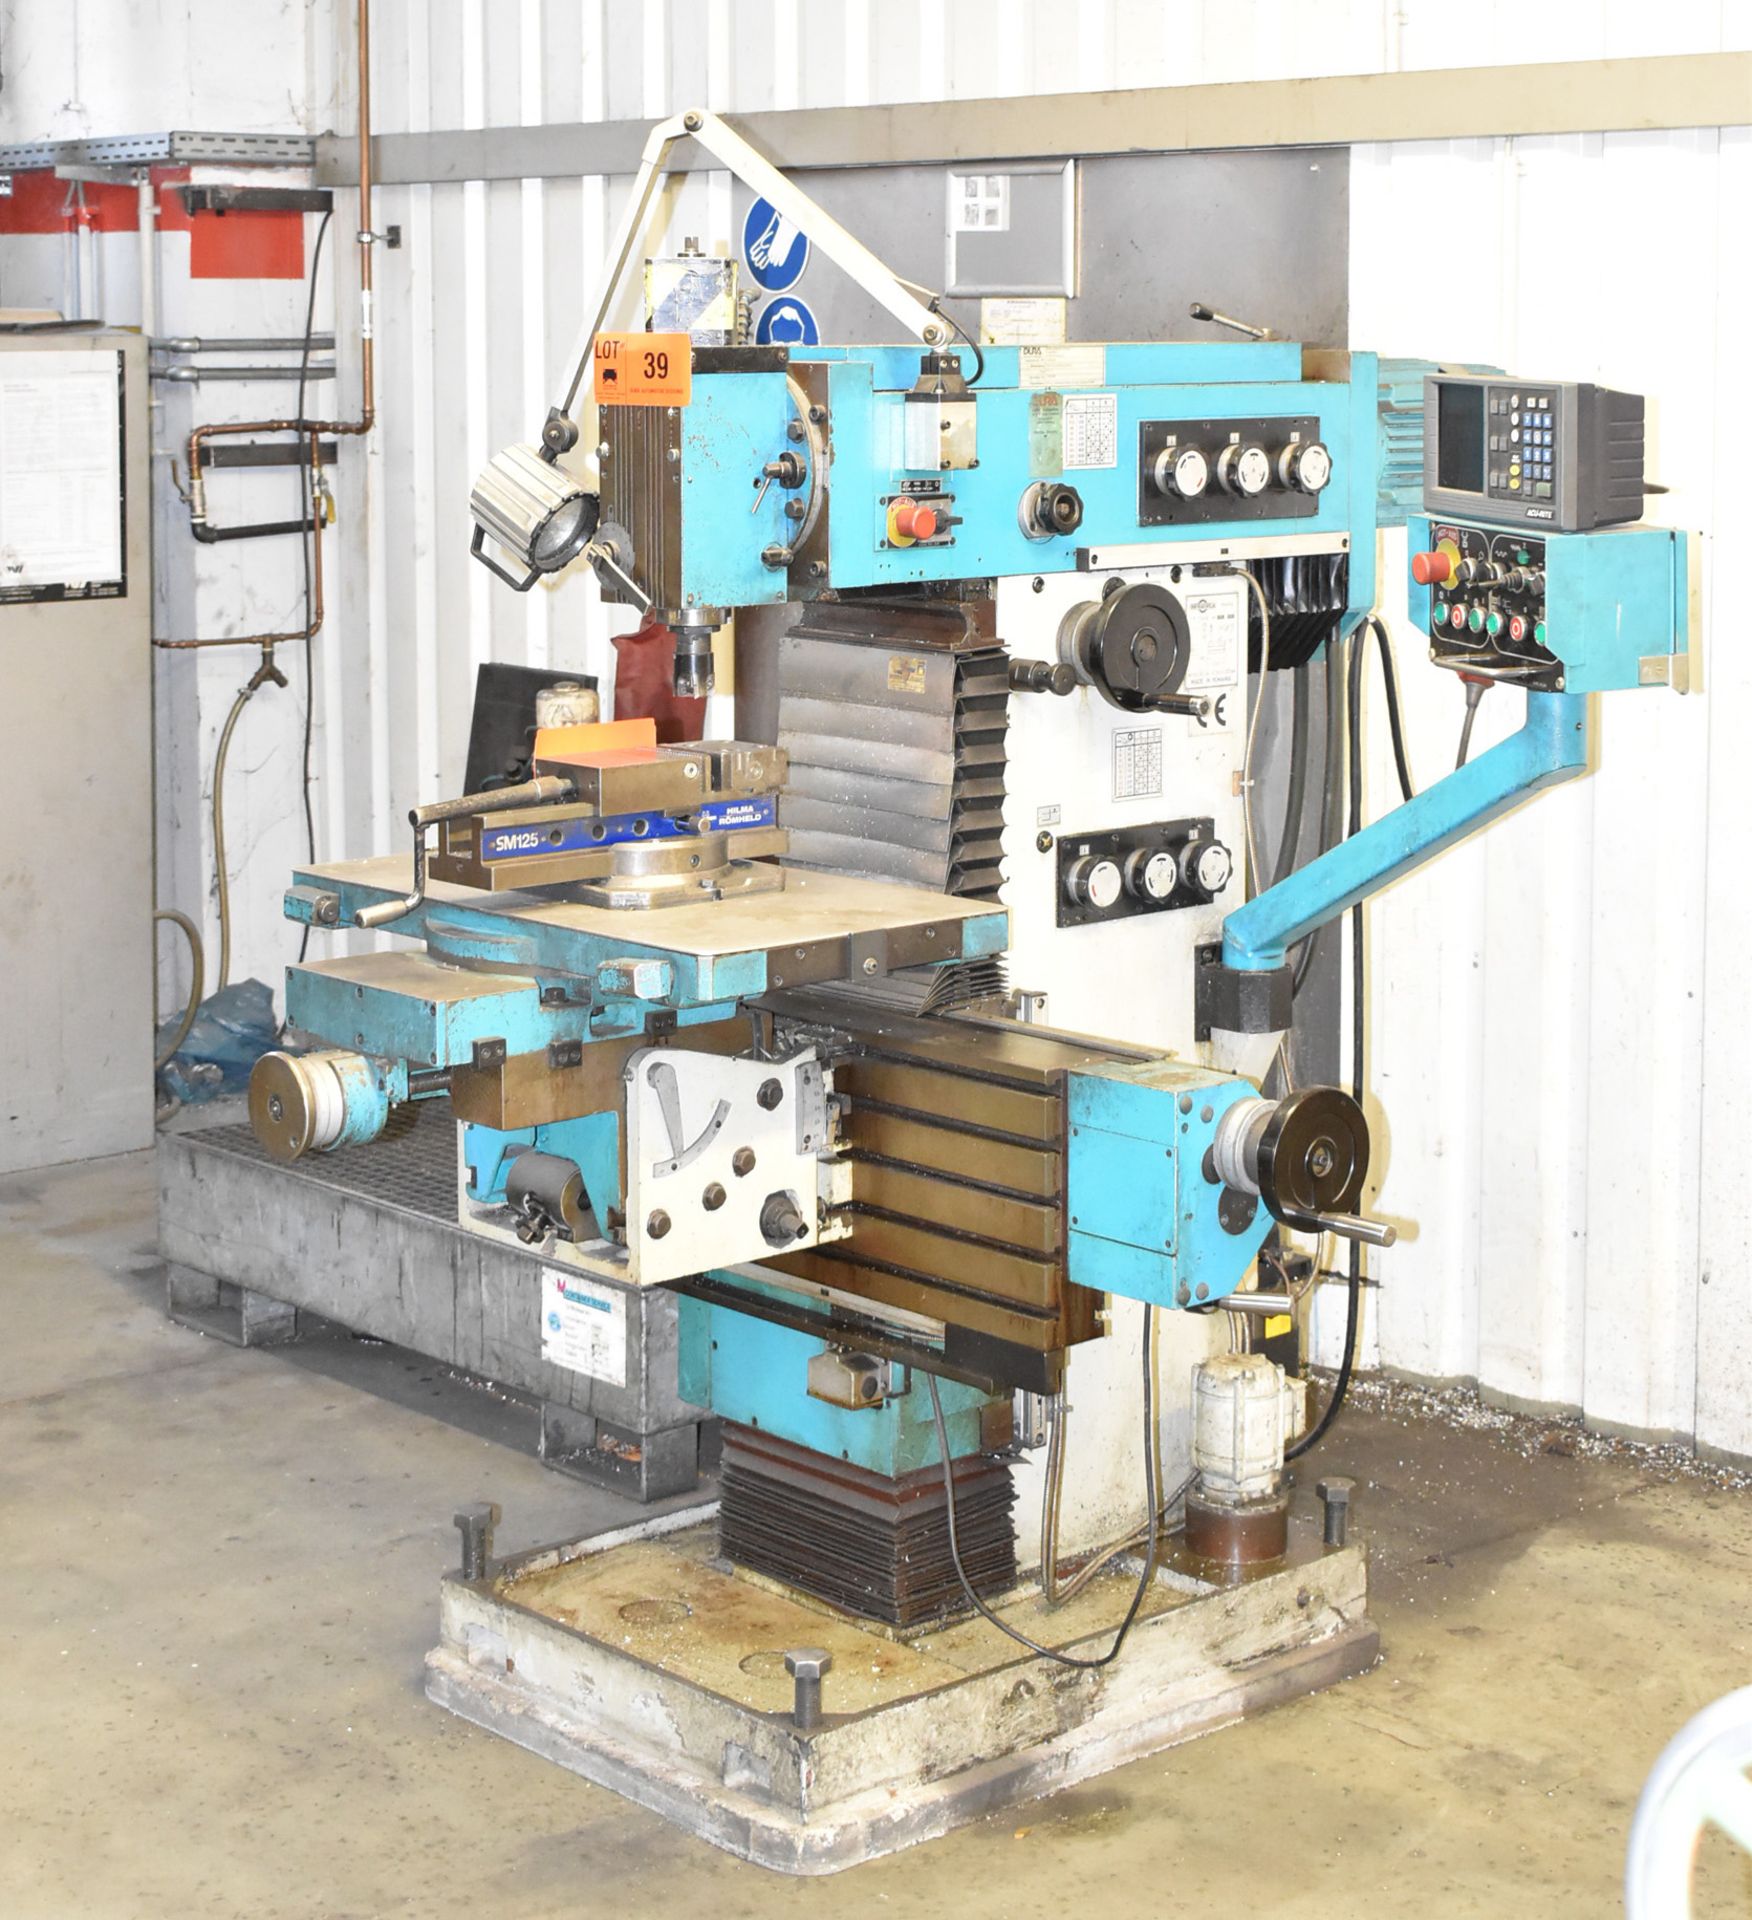 INFRATIREA (1999) FUS32 UNIVERSAL MILLING MACHINE WITH 1000 MM X 320 MM VERTICAL T- SLOT TABLE, - Image 2 of 7